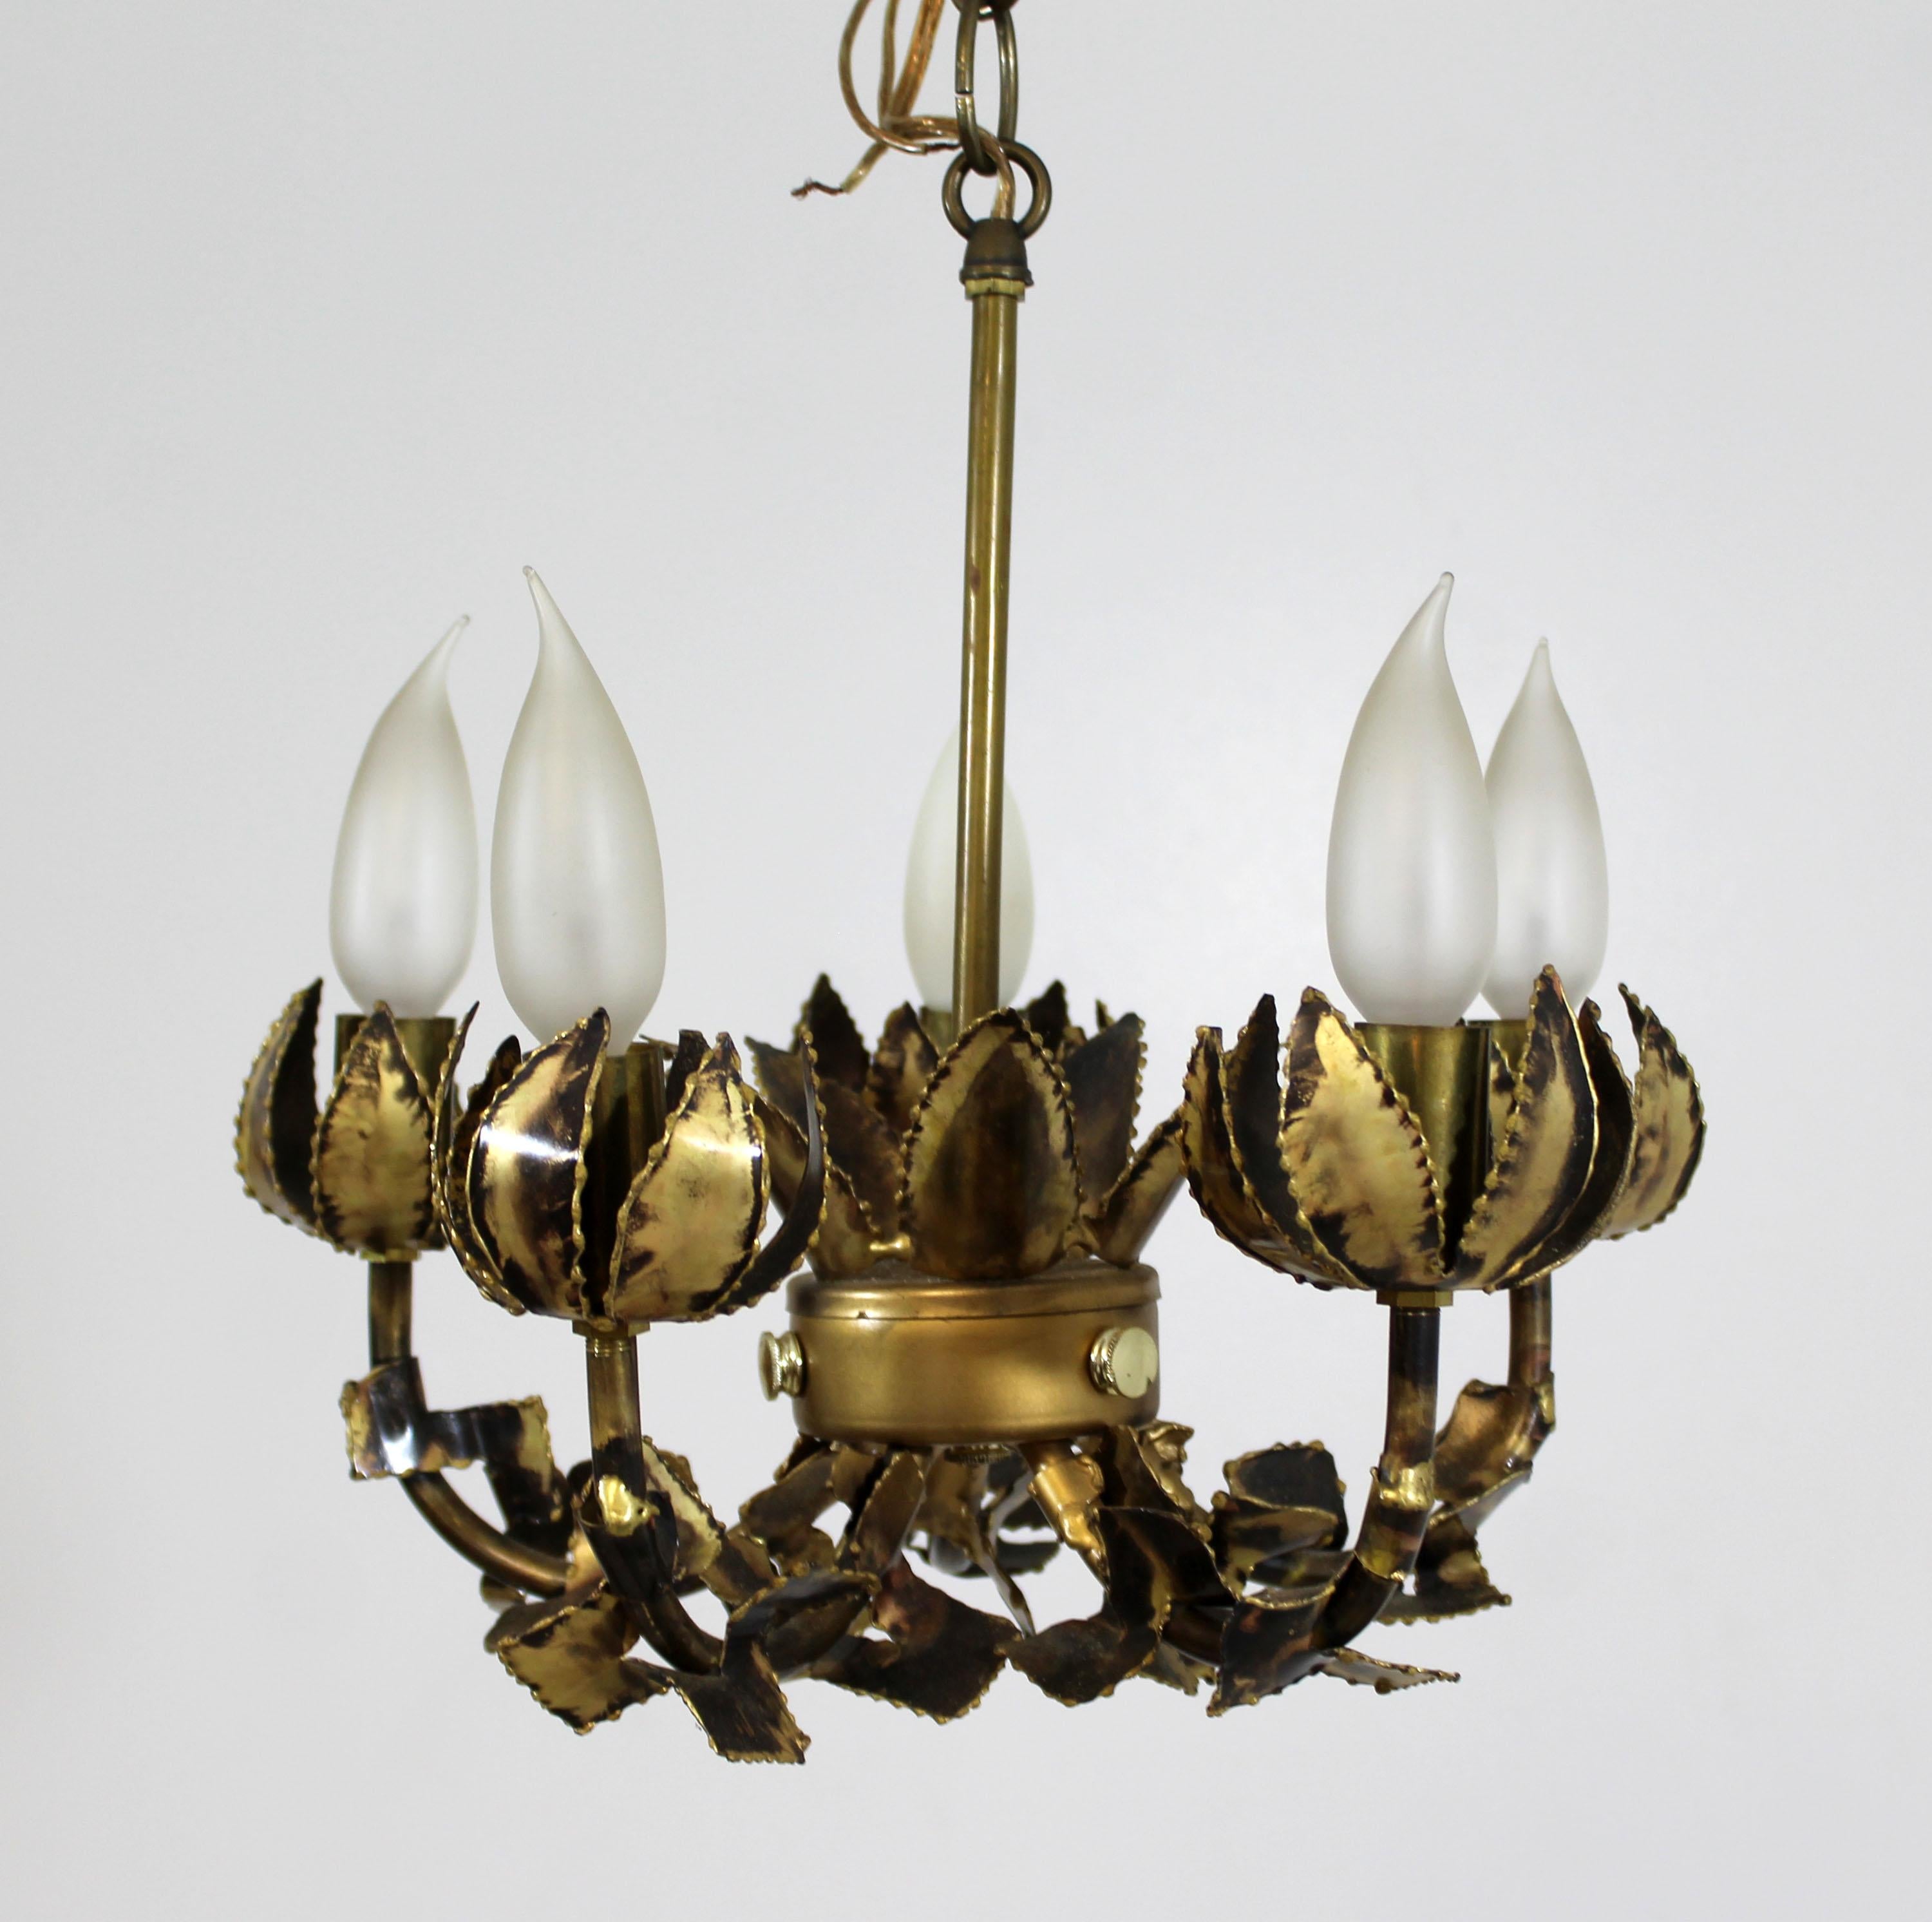 For your consideration is a stunning, small, Brutalist brass chandelier, by Tom Greene, circa 1960s. In very good condition. The dimensions are 12